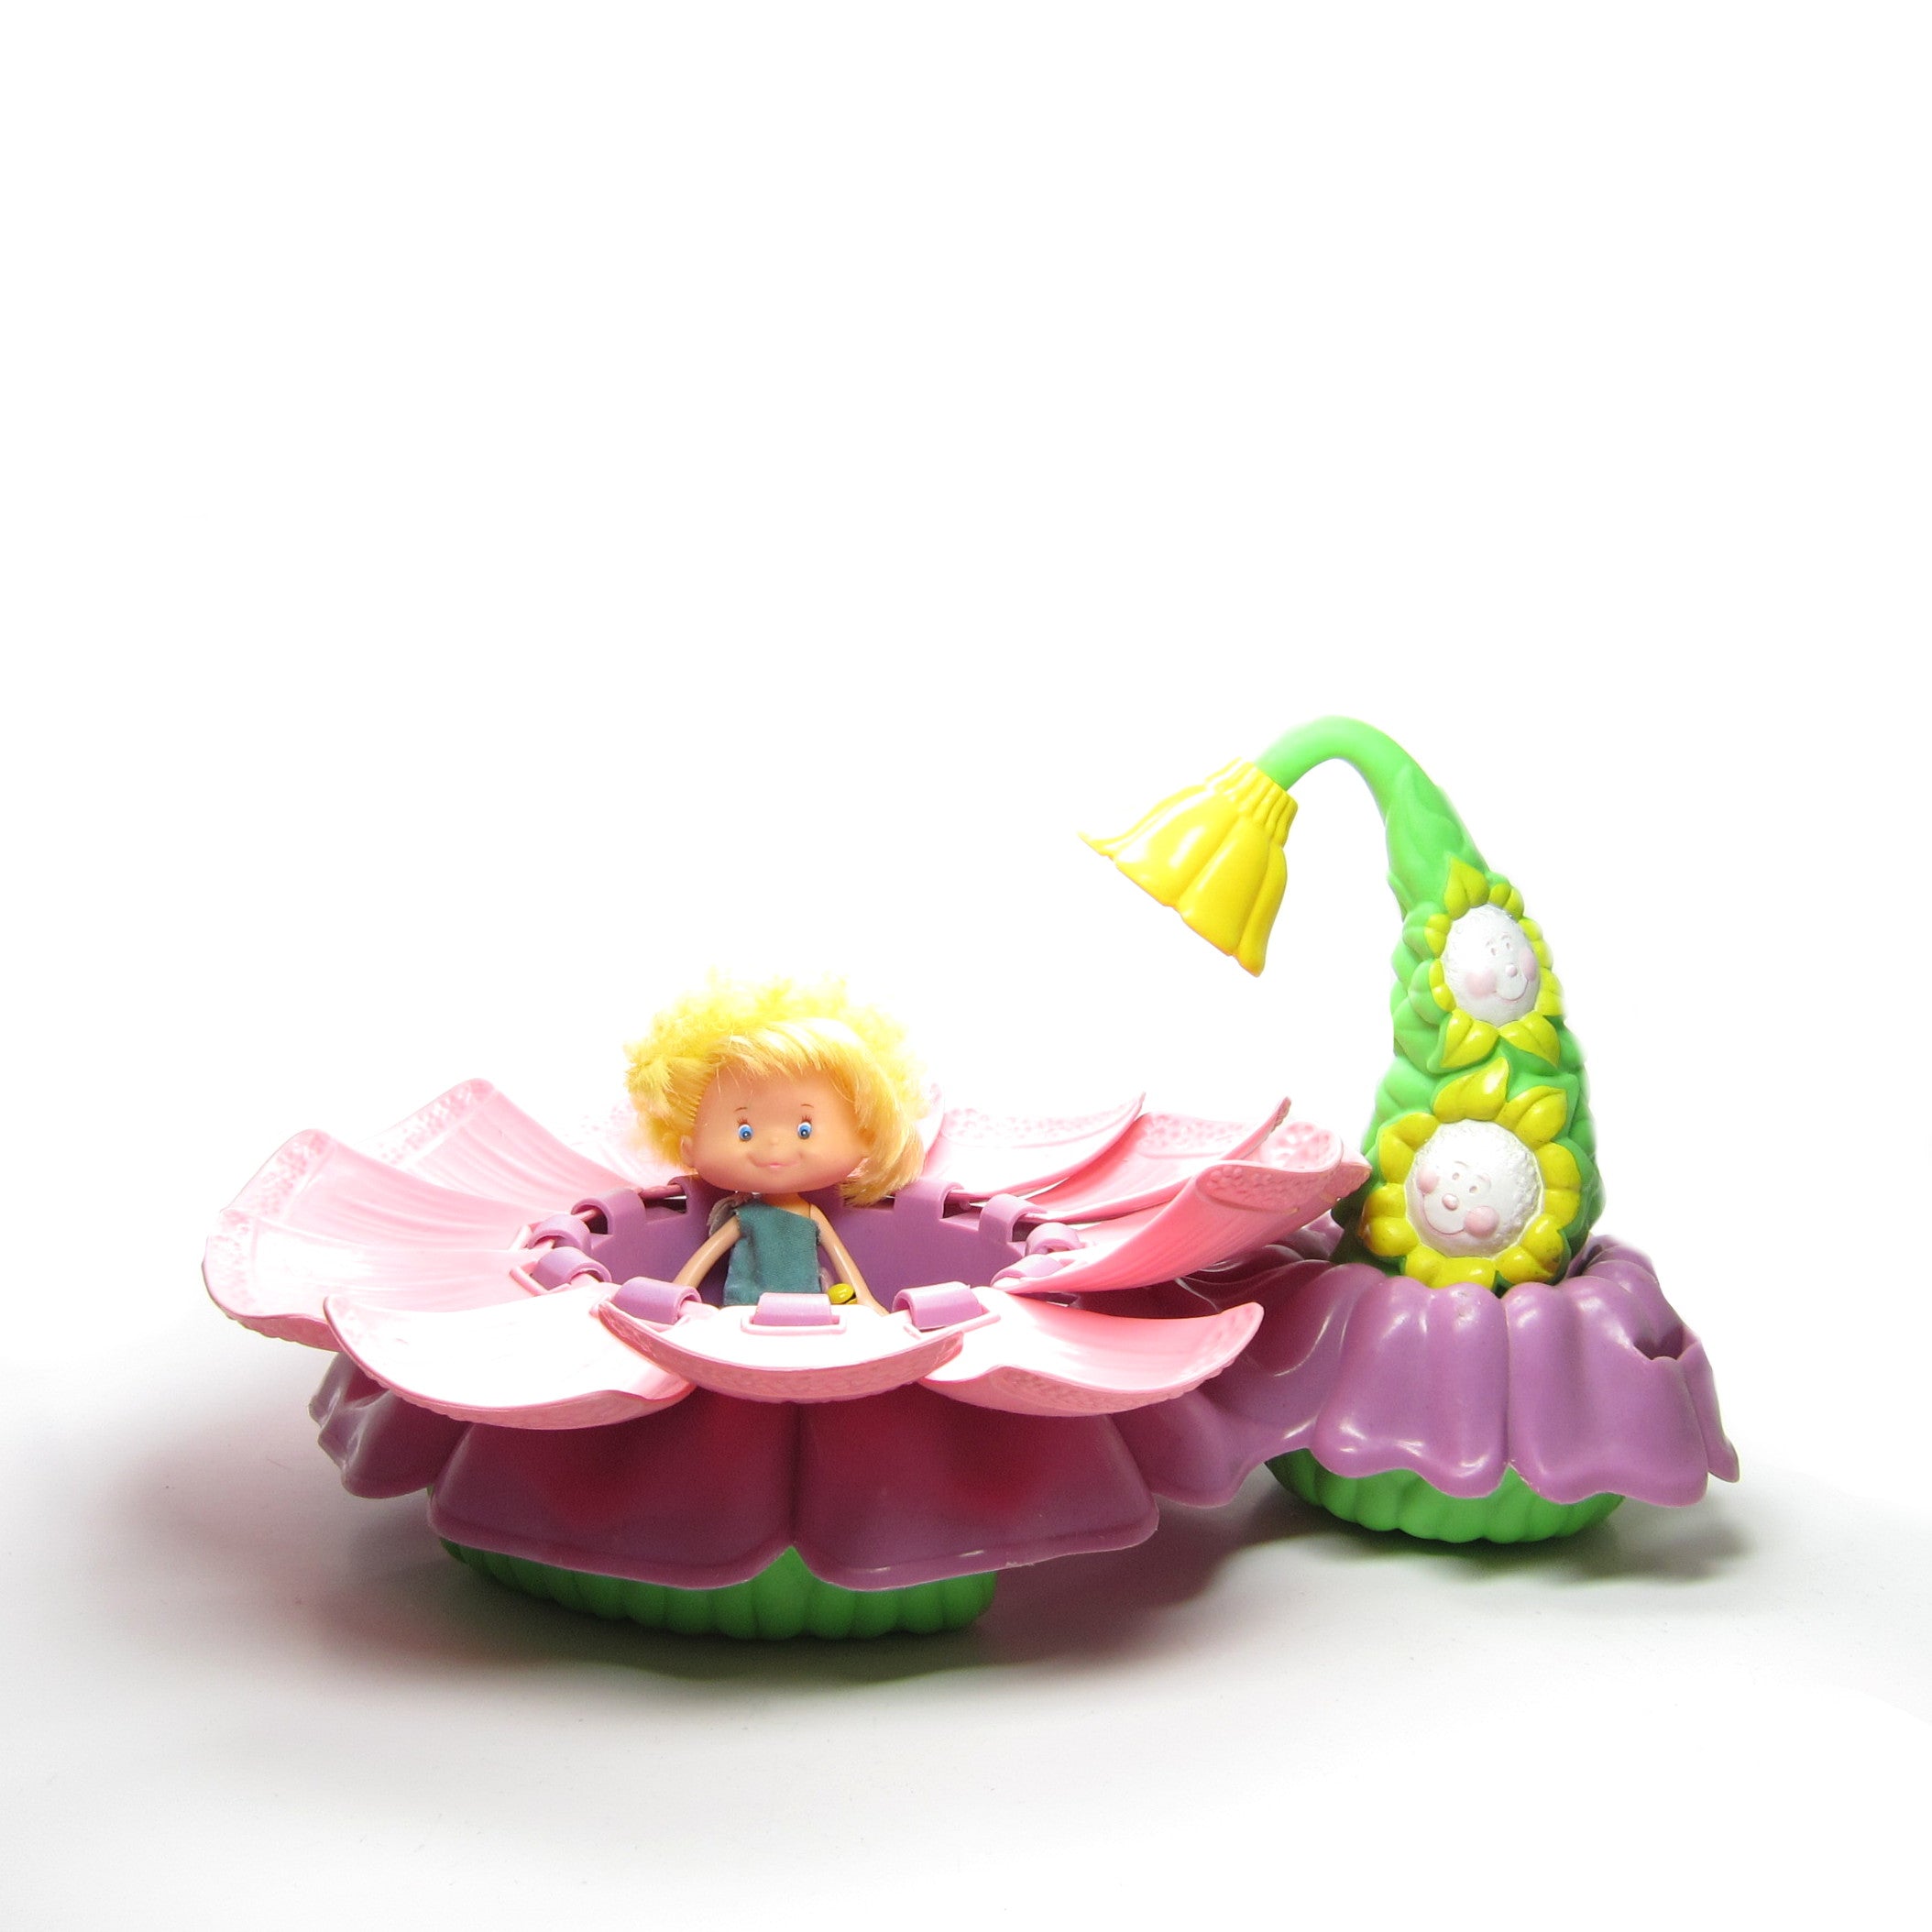 Herself the Elf Flower Shower playset with doll